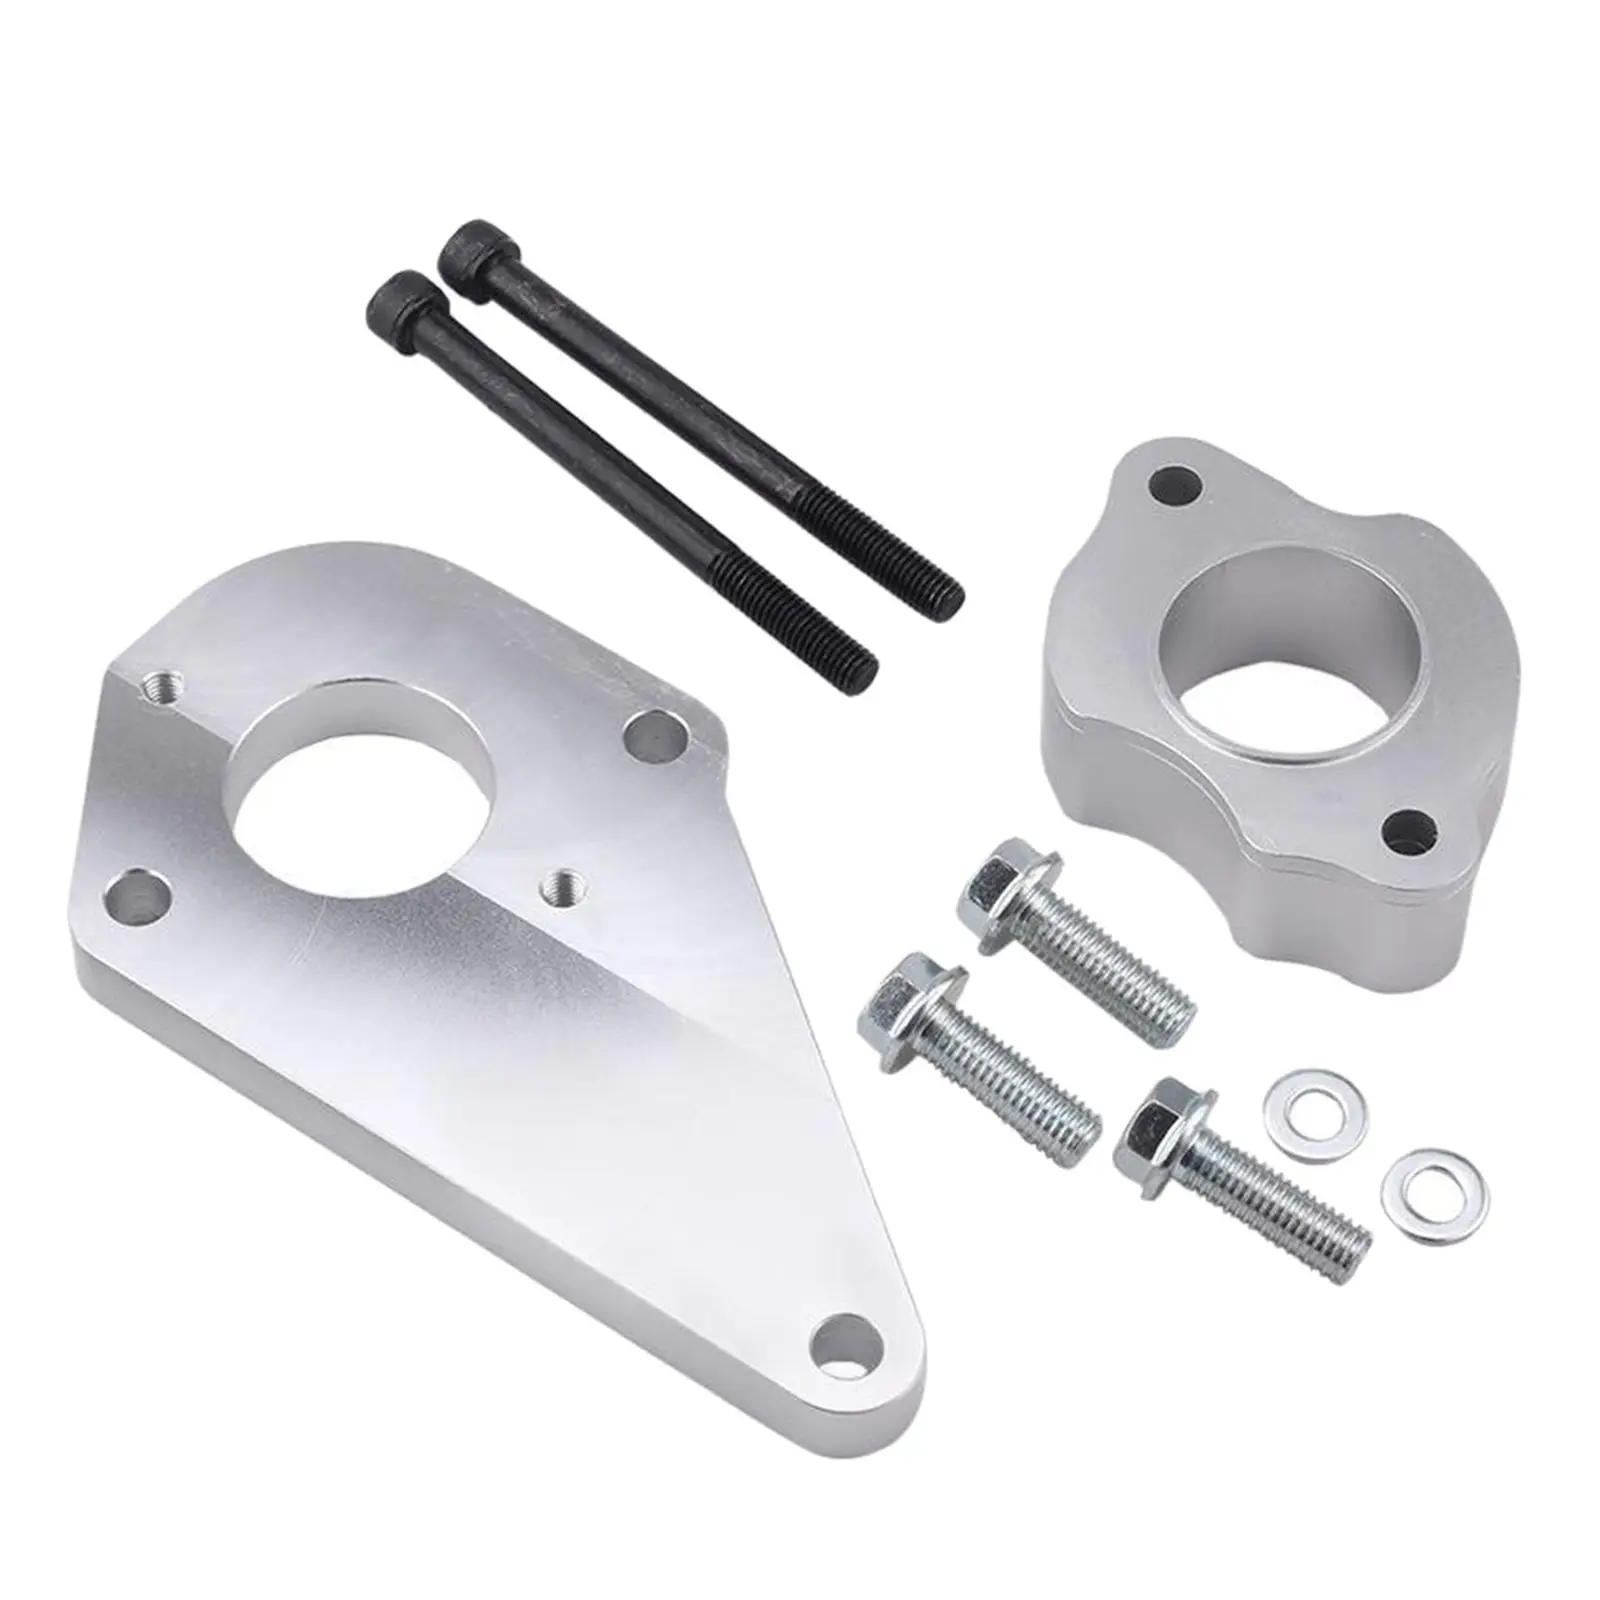 Power Steering Bracket Car Modification for Camaro LS1 5.3L 6.0L 4.8L Professional Manufacturing High precision RS-OFI036